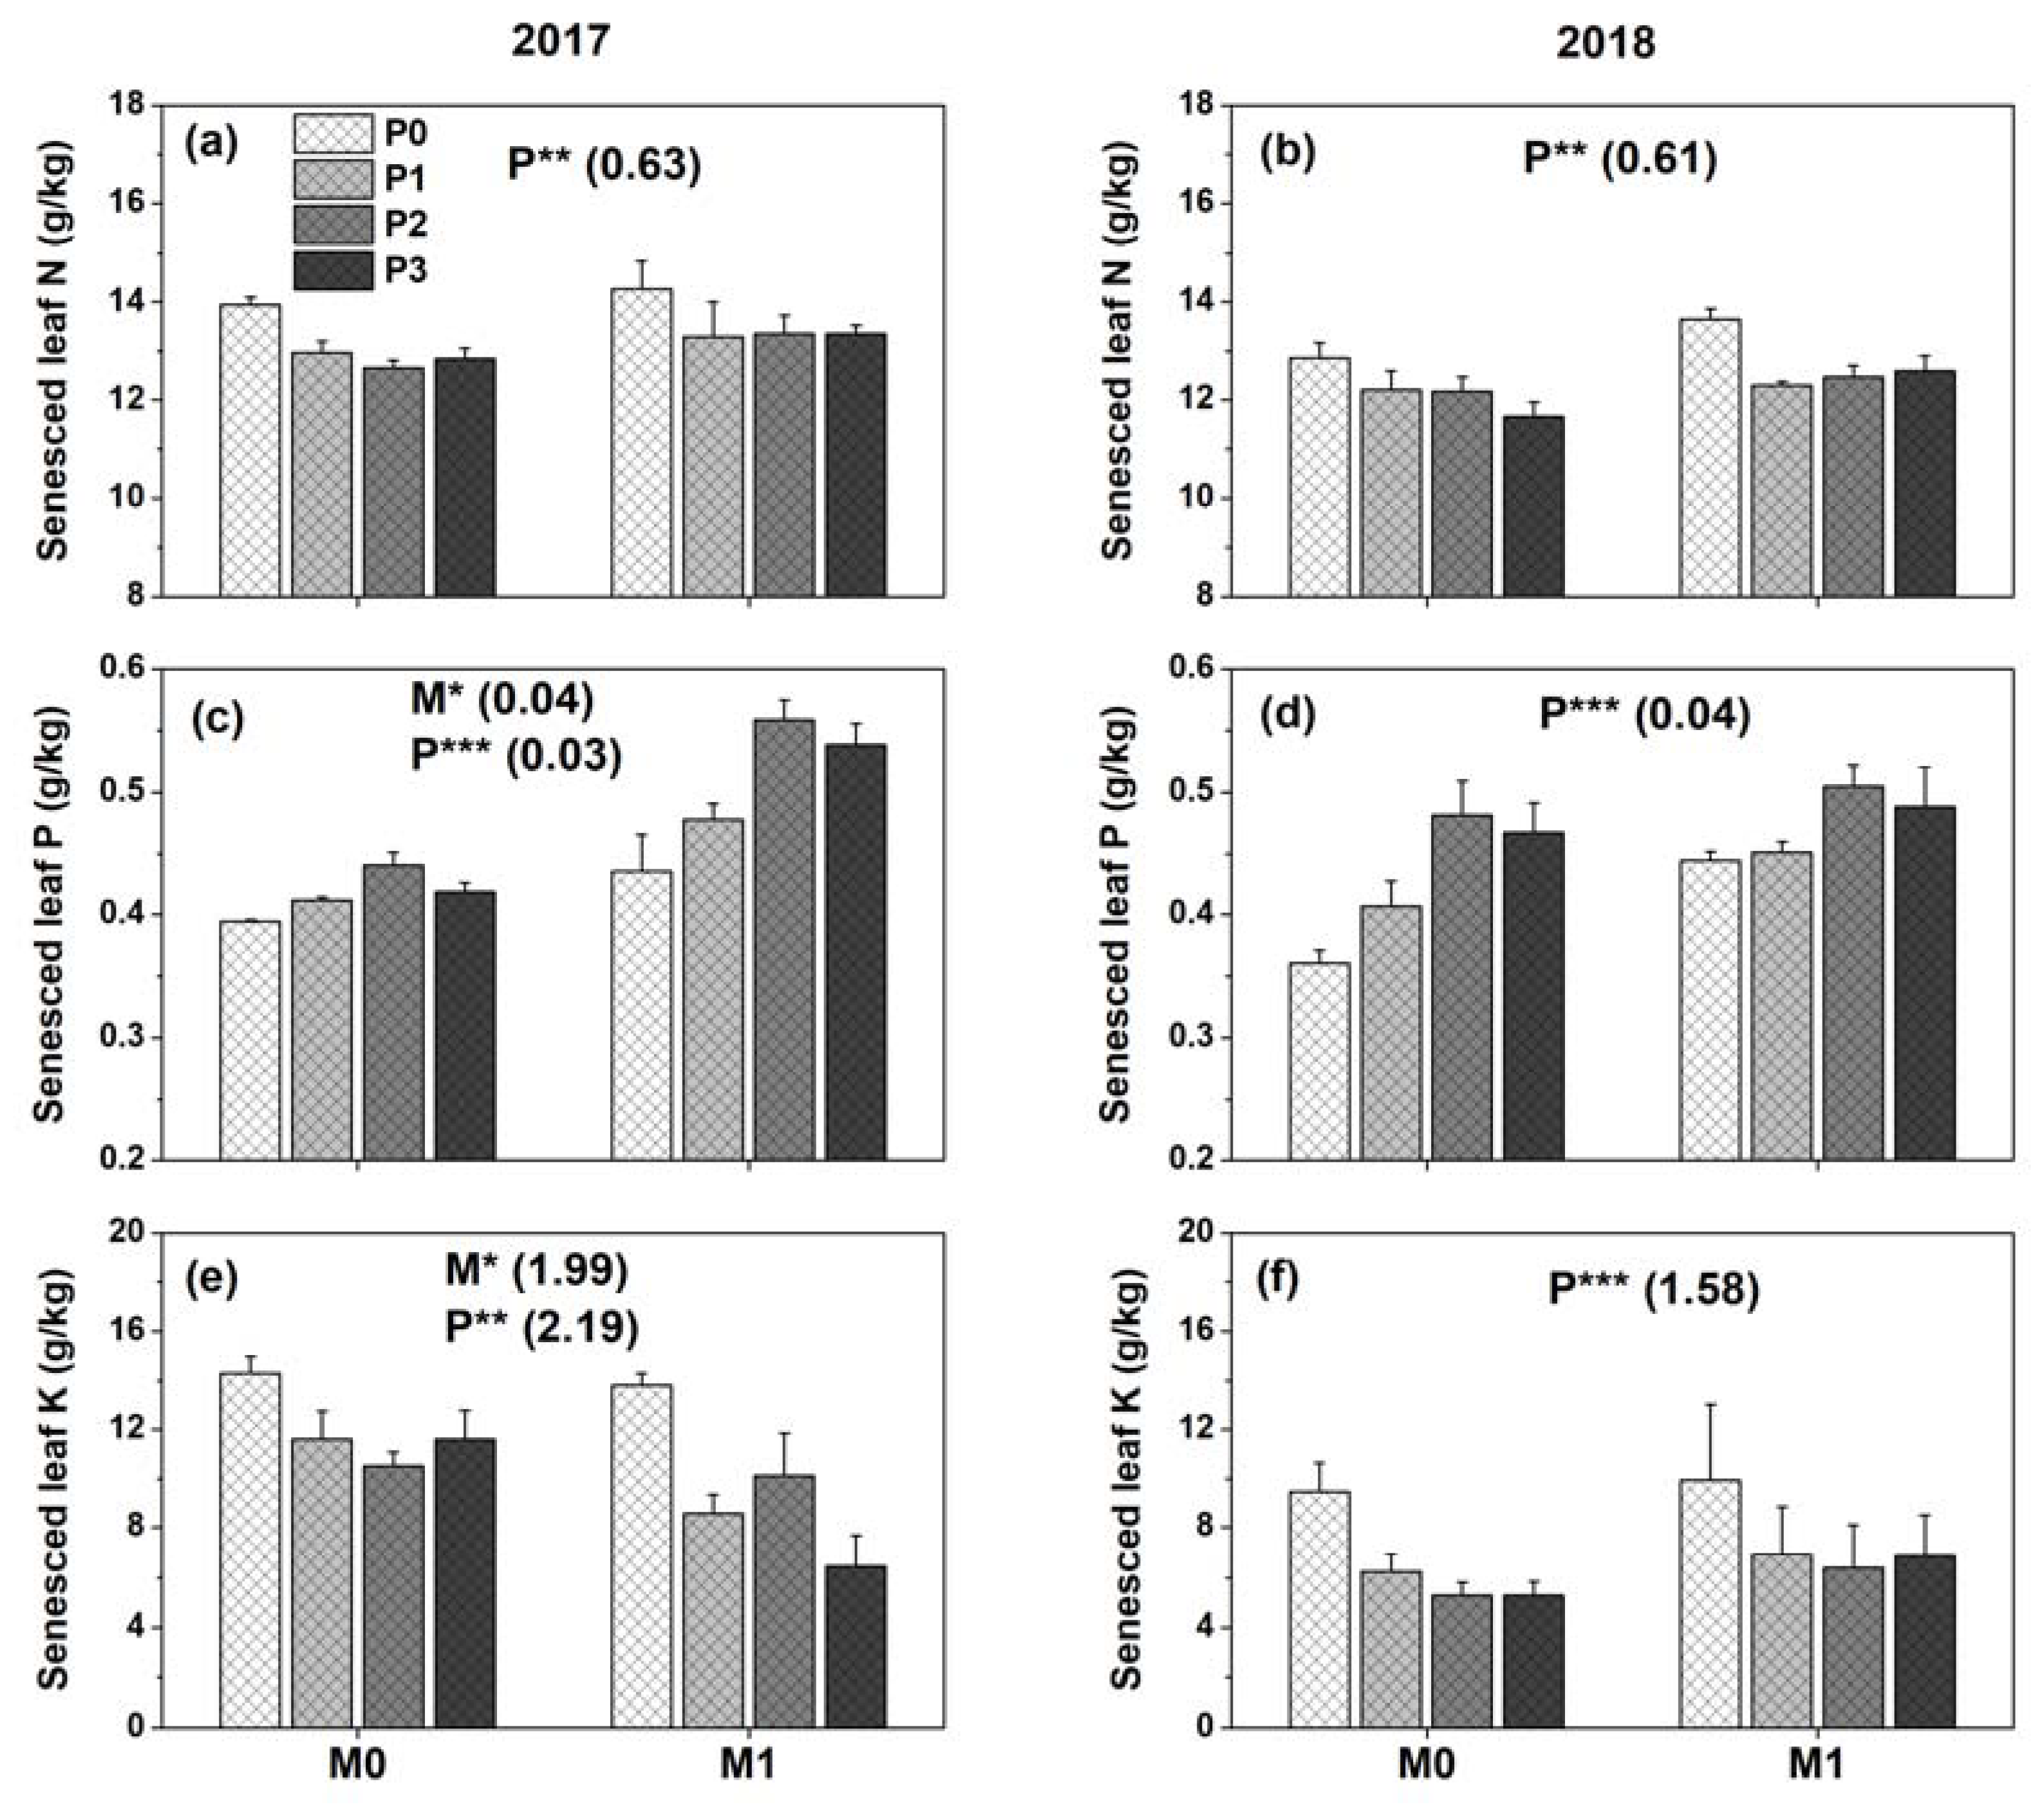 Agronomy Free Full Text Nitrogen Phosphorus And Potassium Resorption Responses Of Alfalfa To Increasing Soil Water And P Availability In A Semi Arid Environment Html